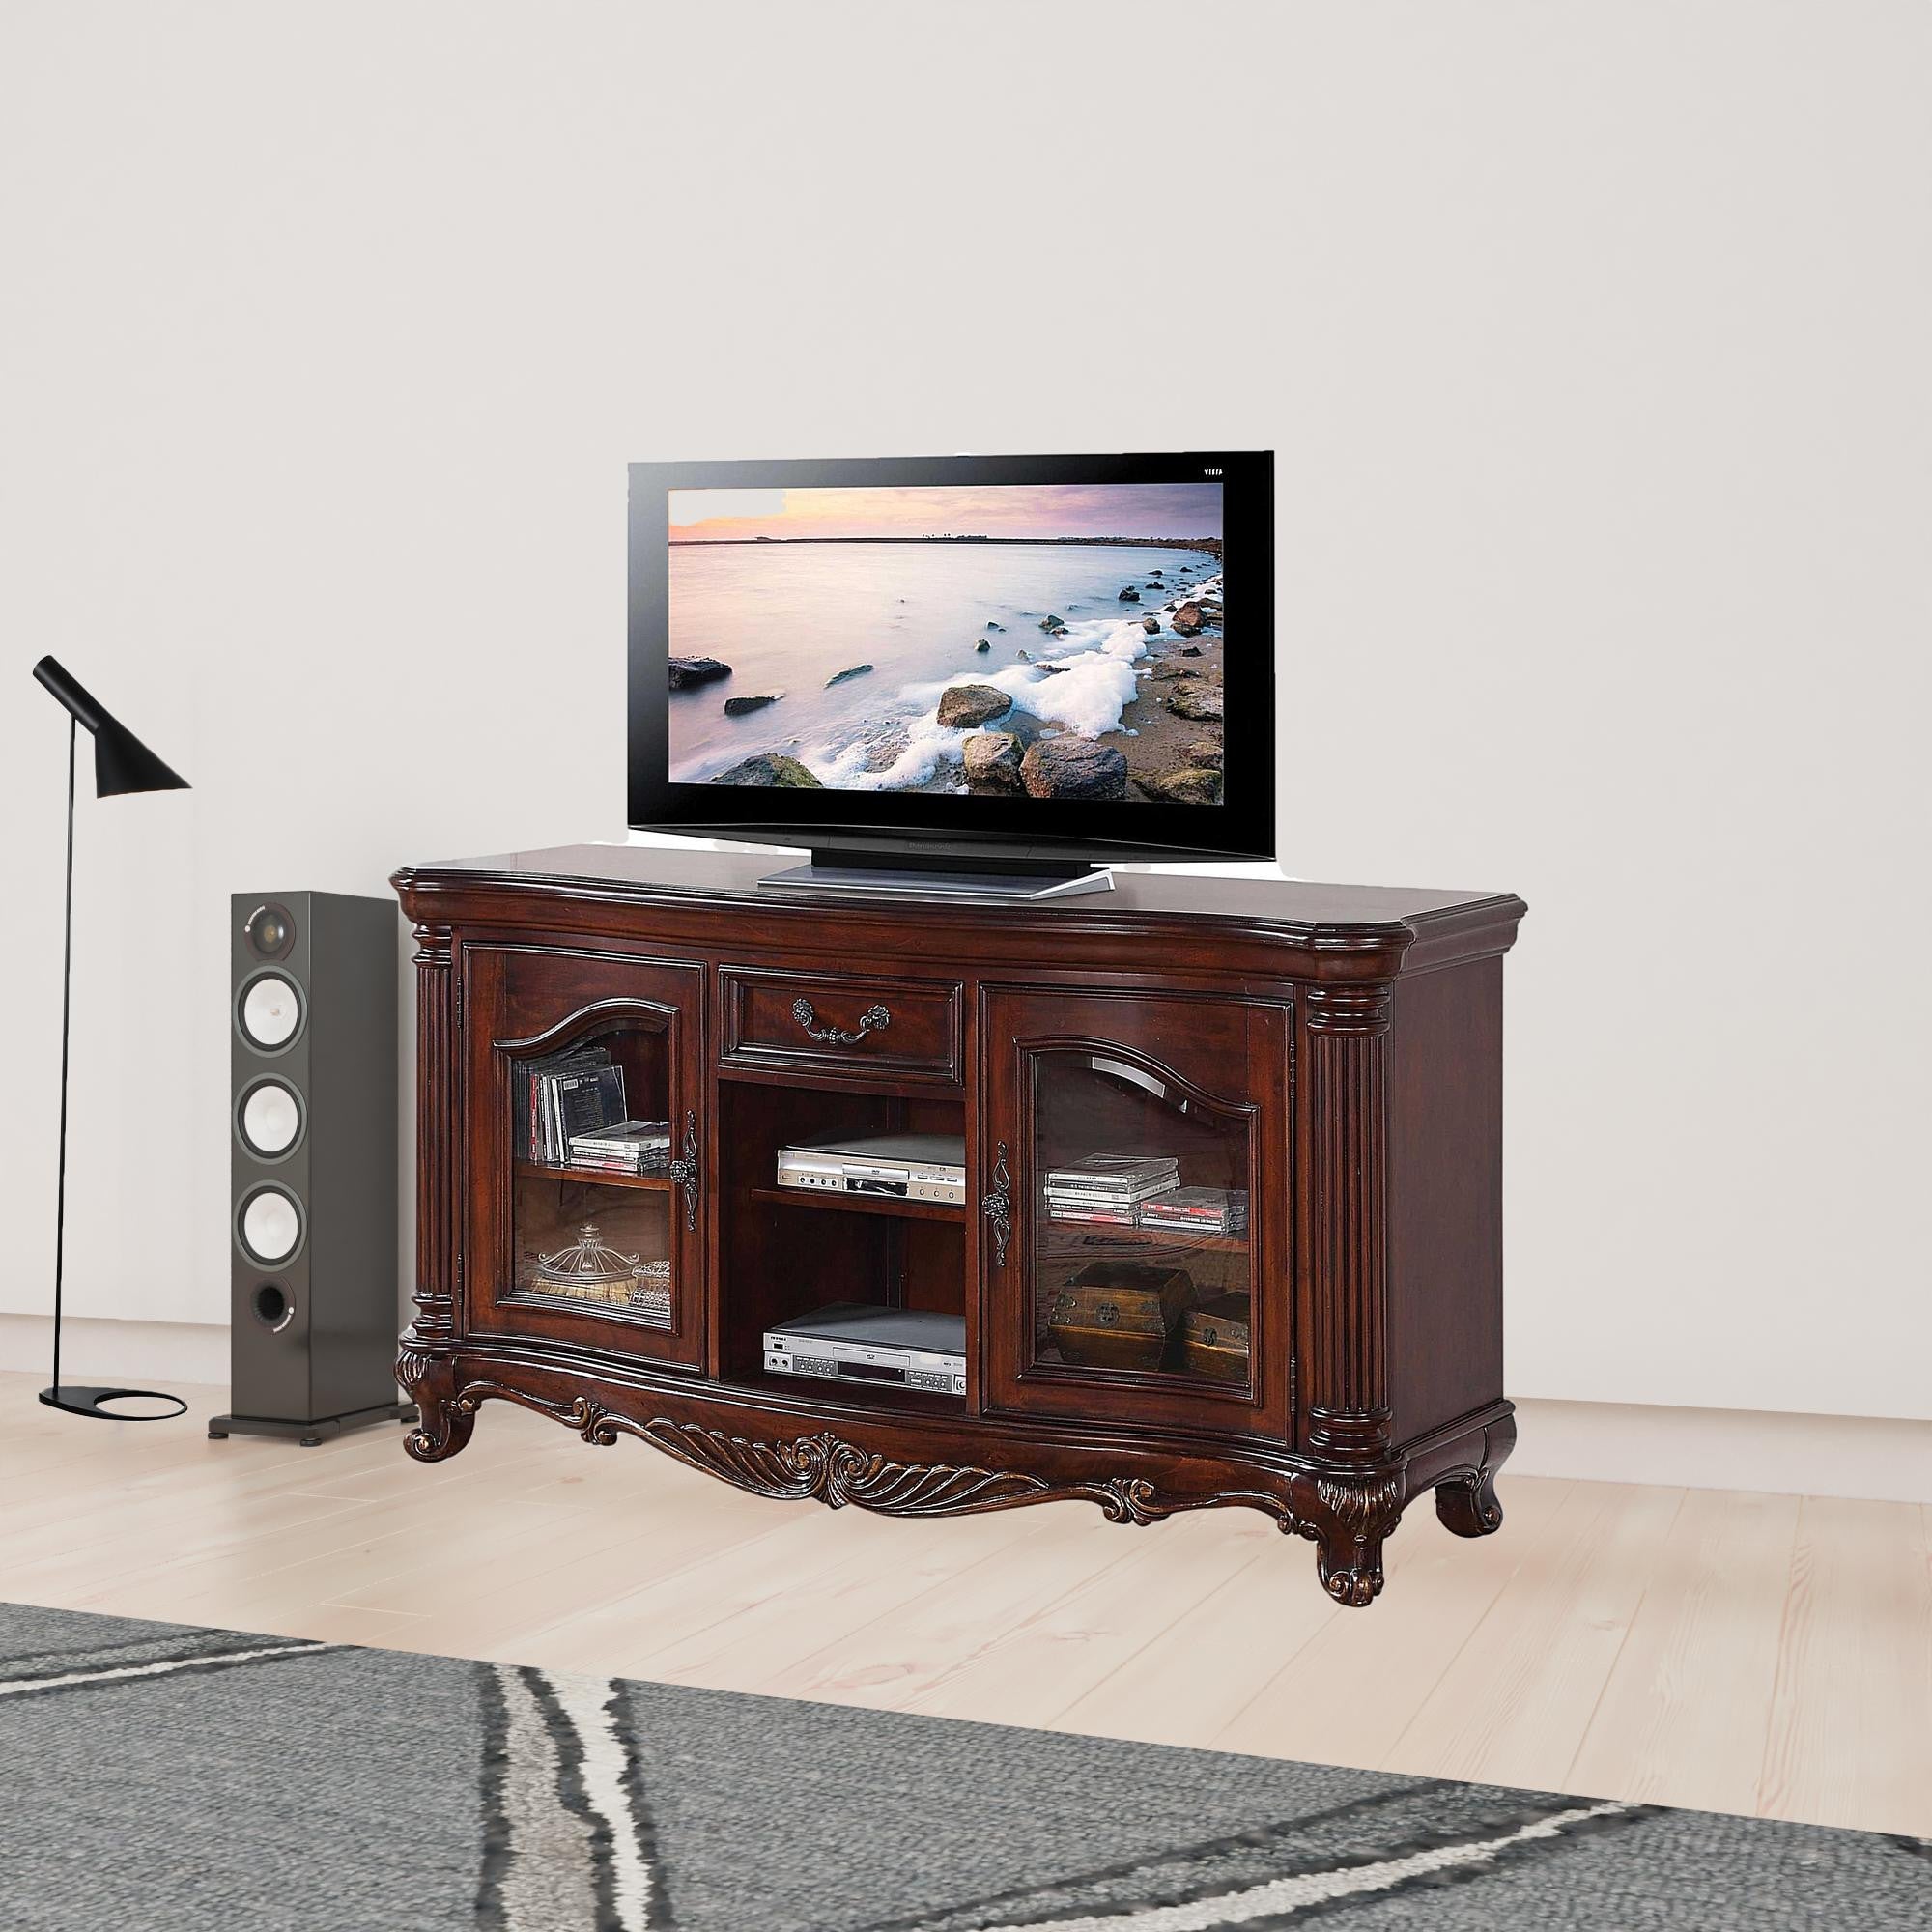 20" Brown Cabinet Enclosed Storage TV Stand with Bookcase